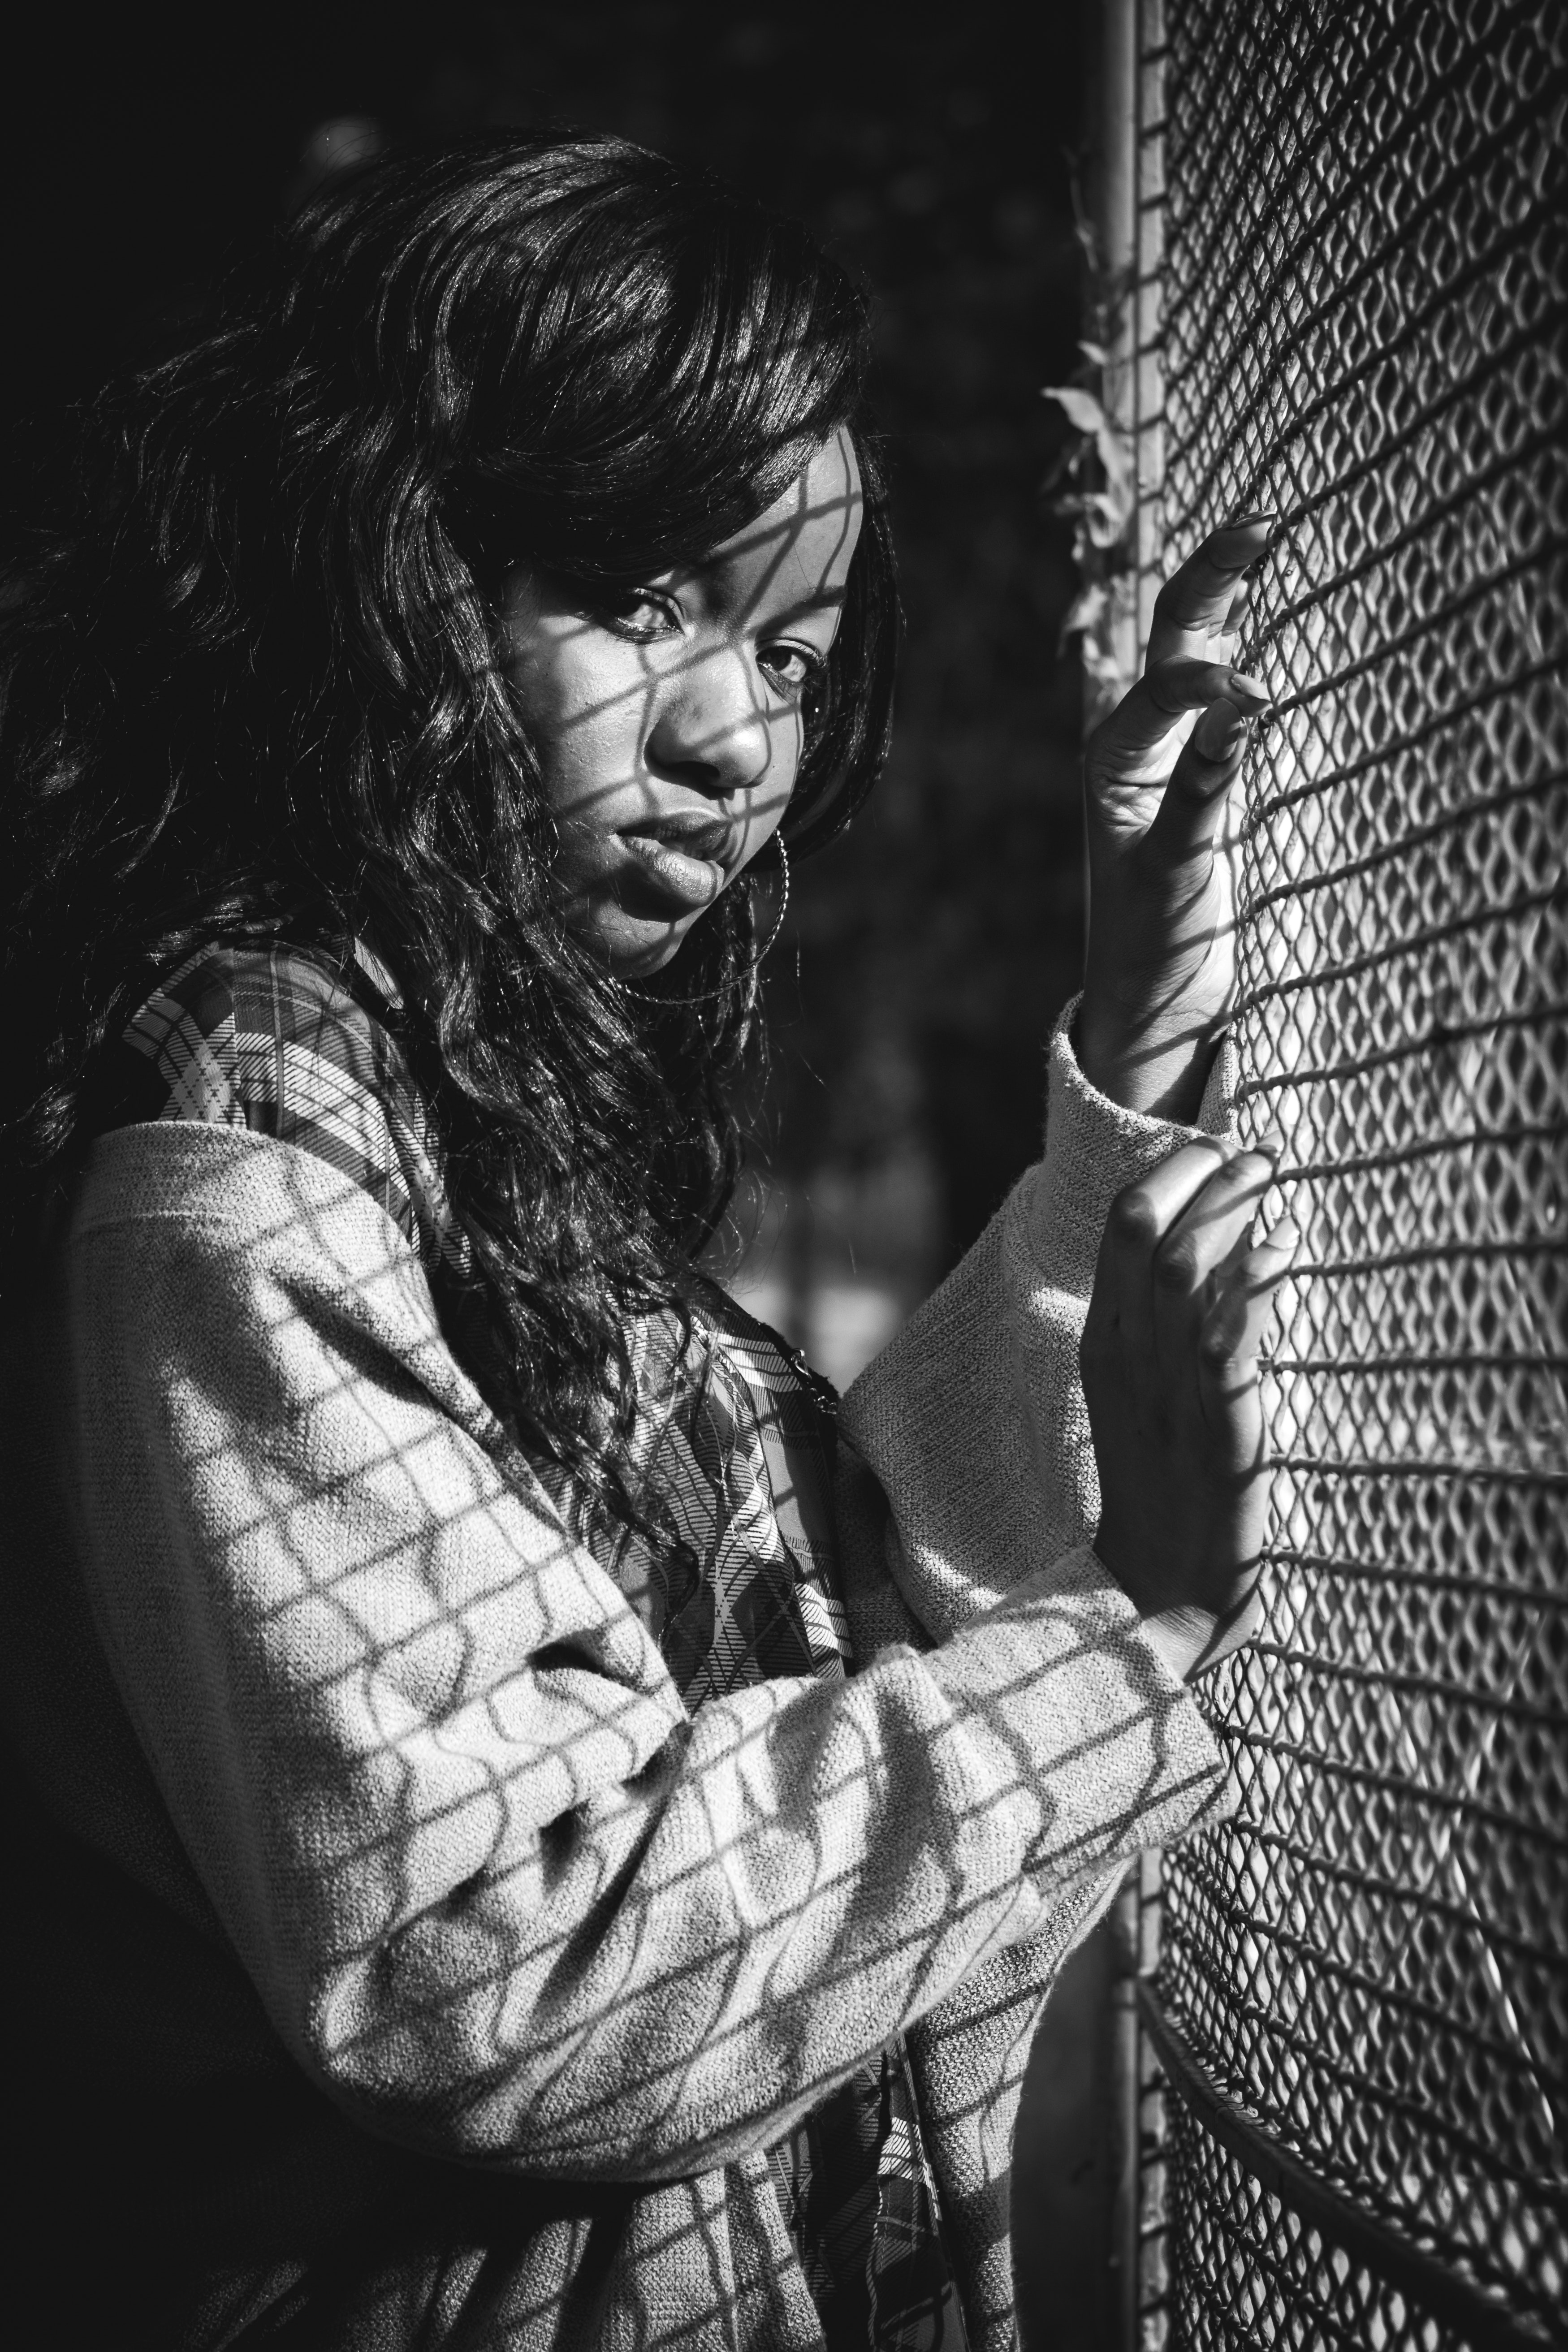 Grey scale photography of woman standing against mesh grill